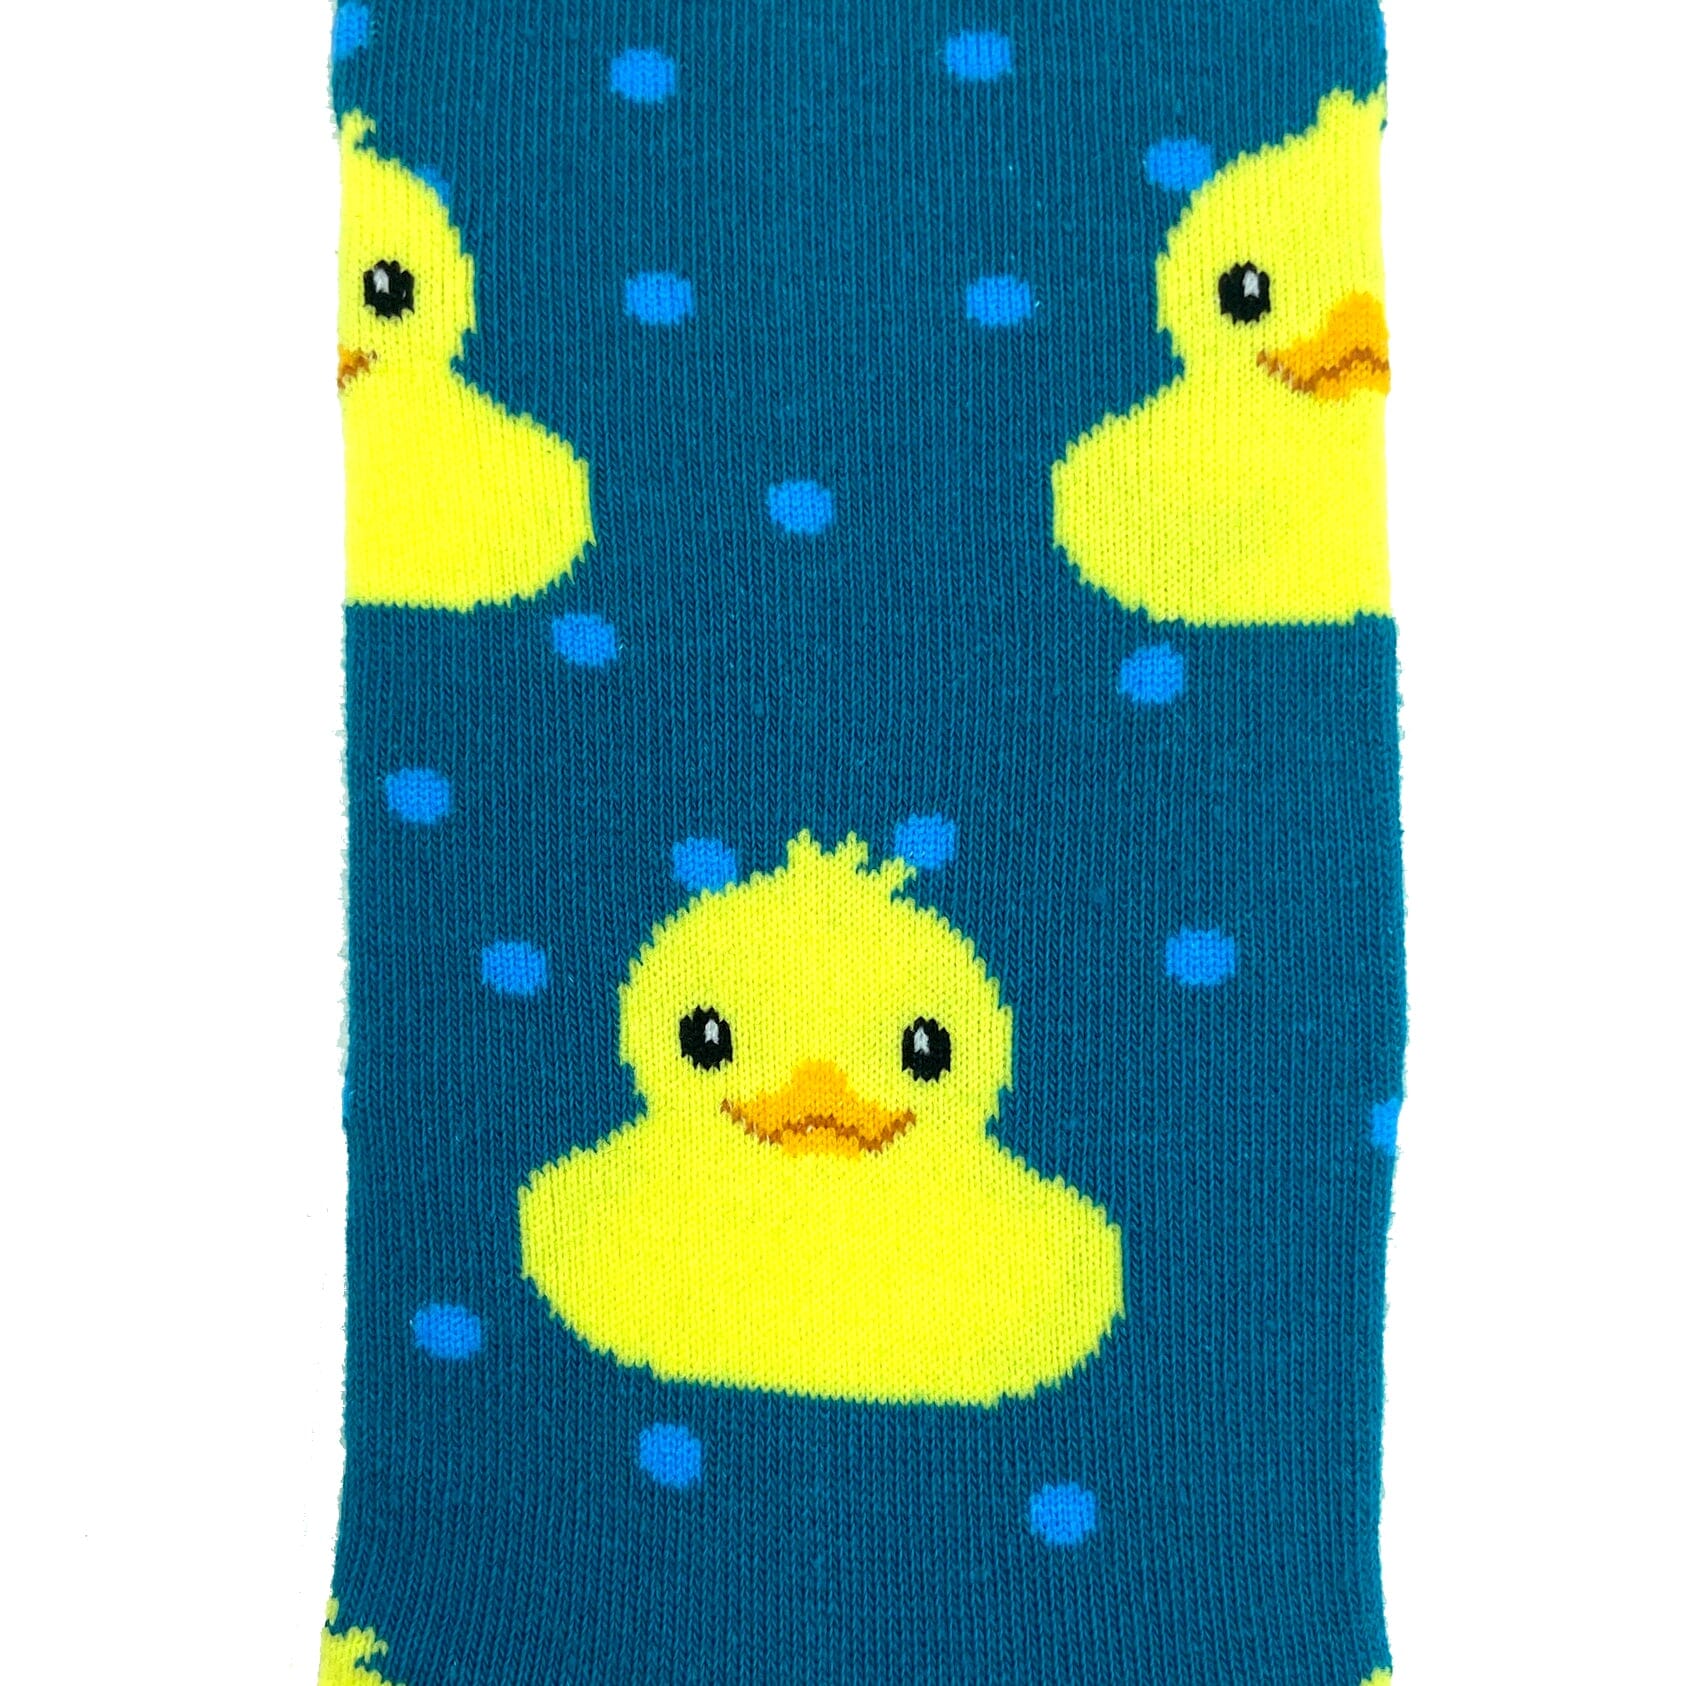 Teal Blue Unisex Yellow Rubber Duck Patterned Comfy Novelty Crew Socks